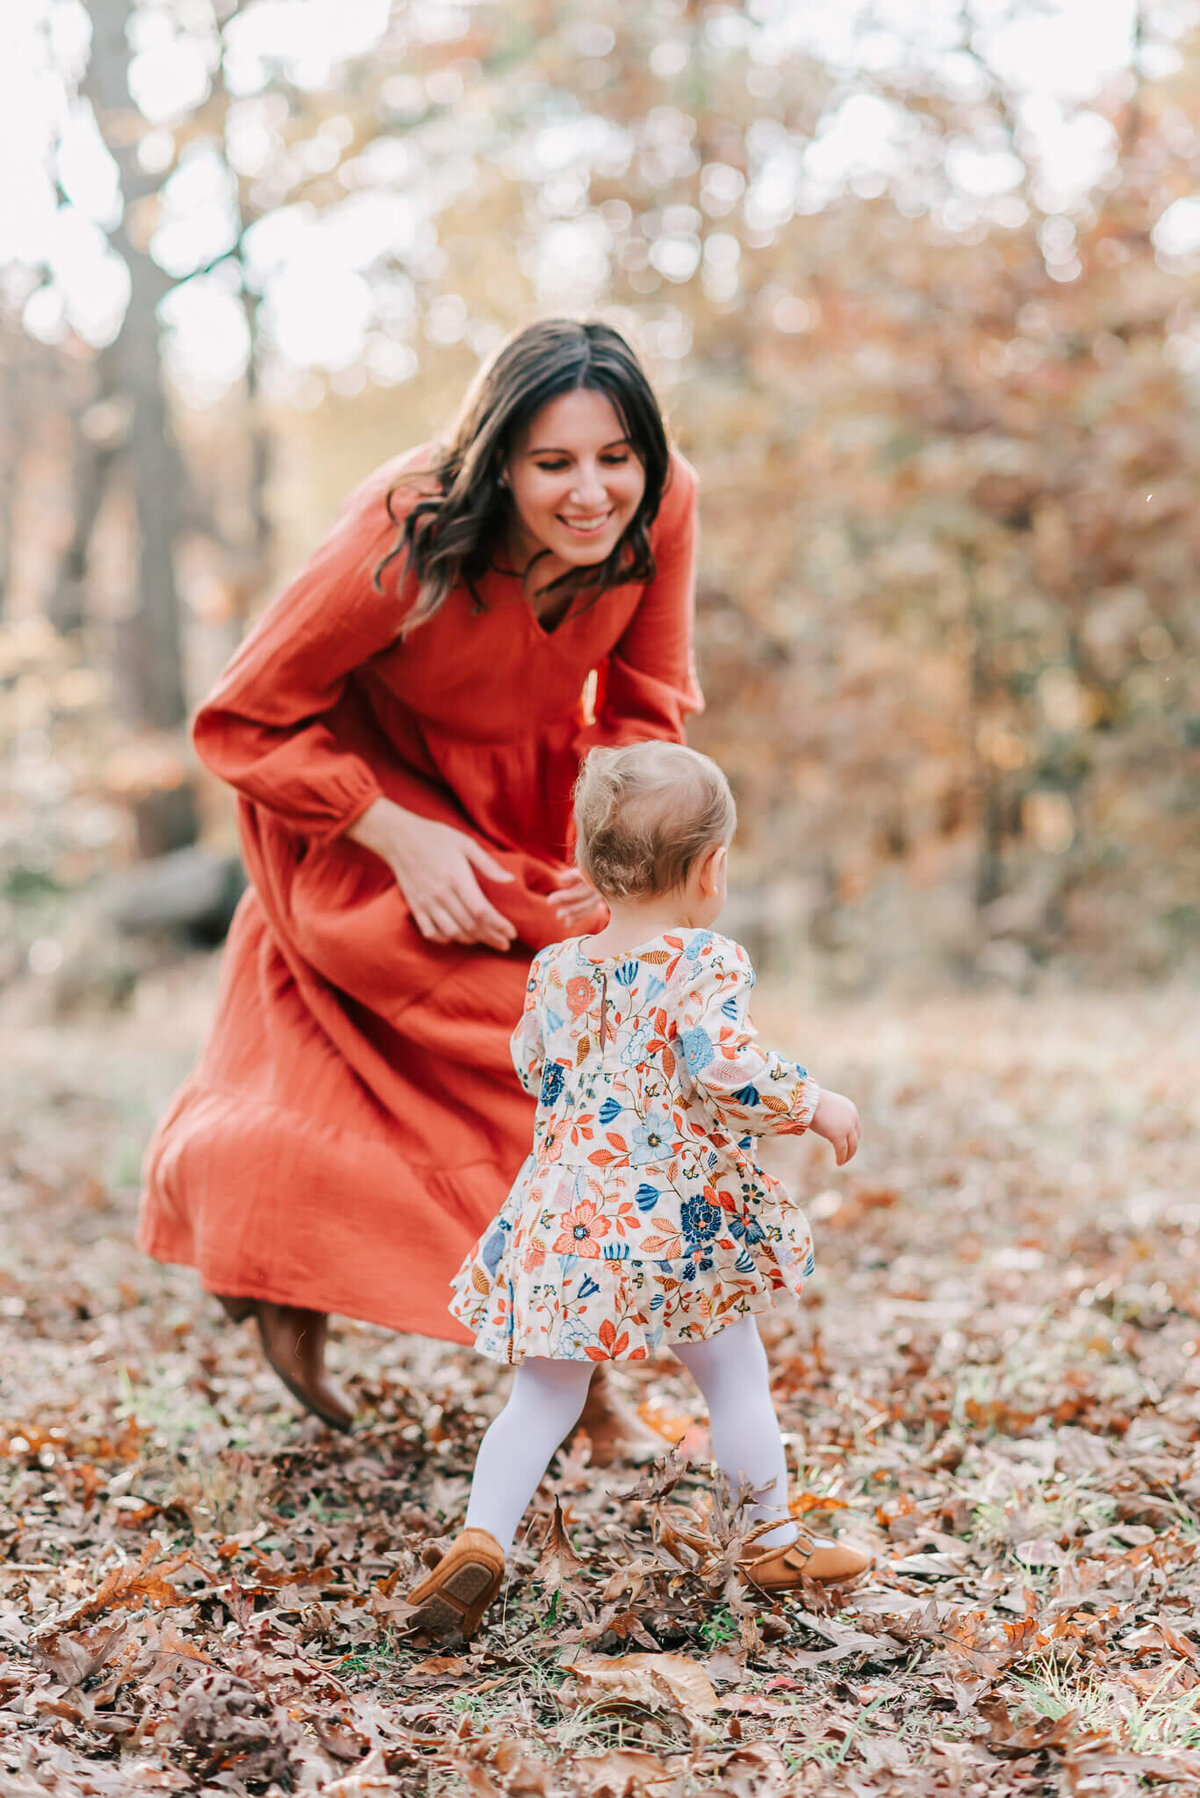 A woman in a long orange dress chases after her daughter wearing a floral pattern